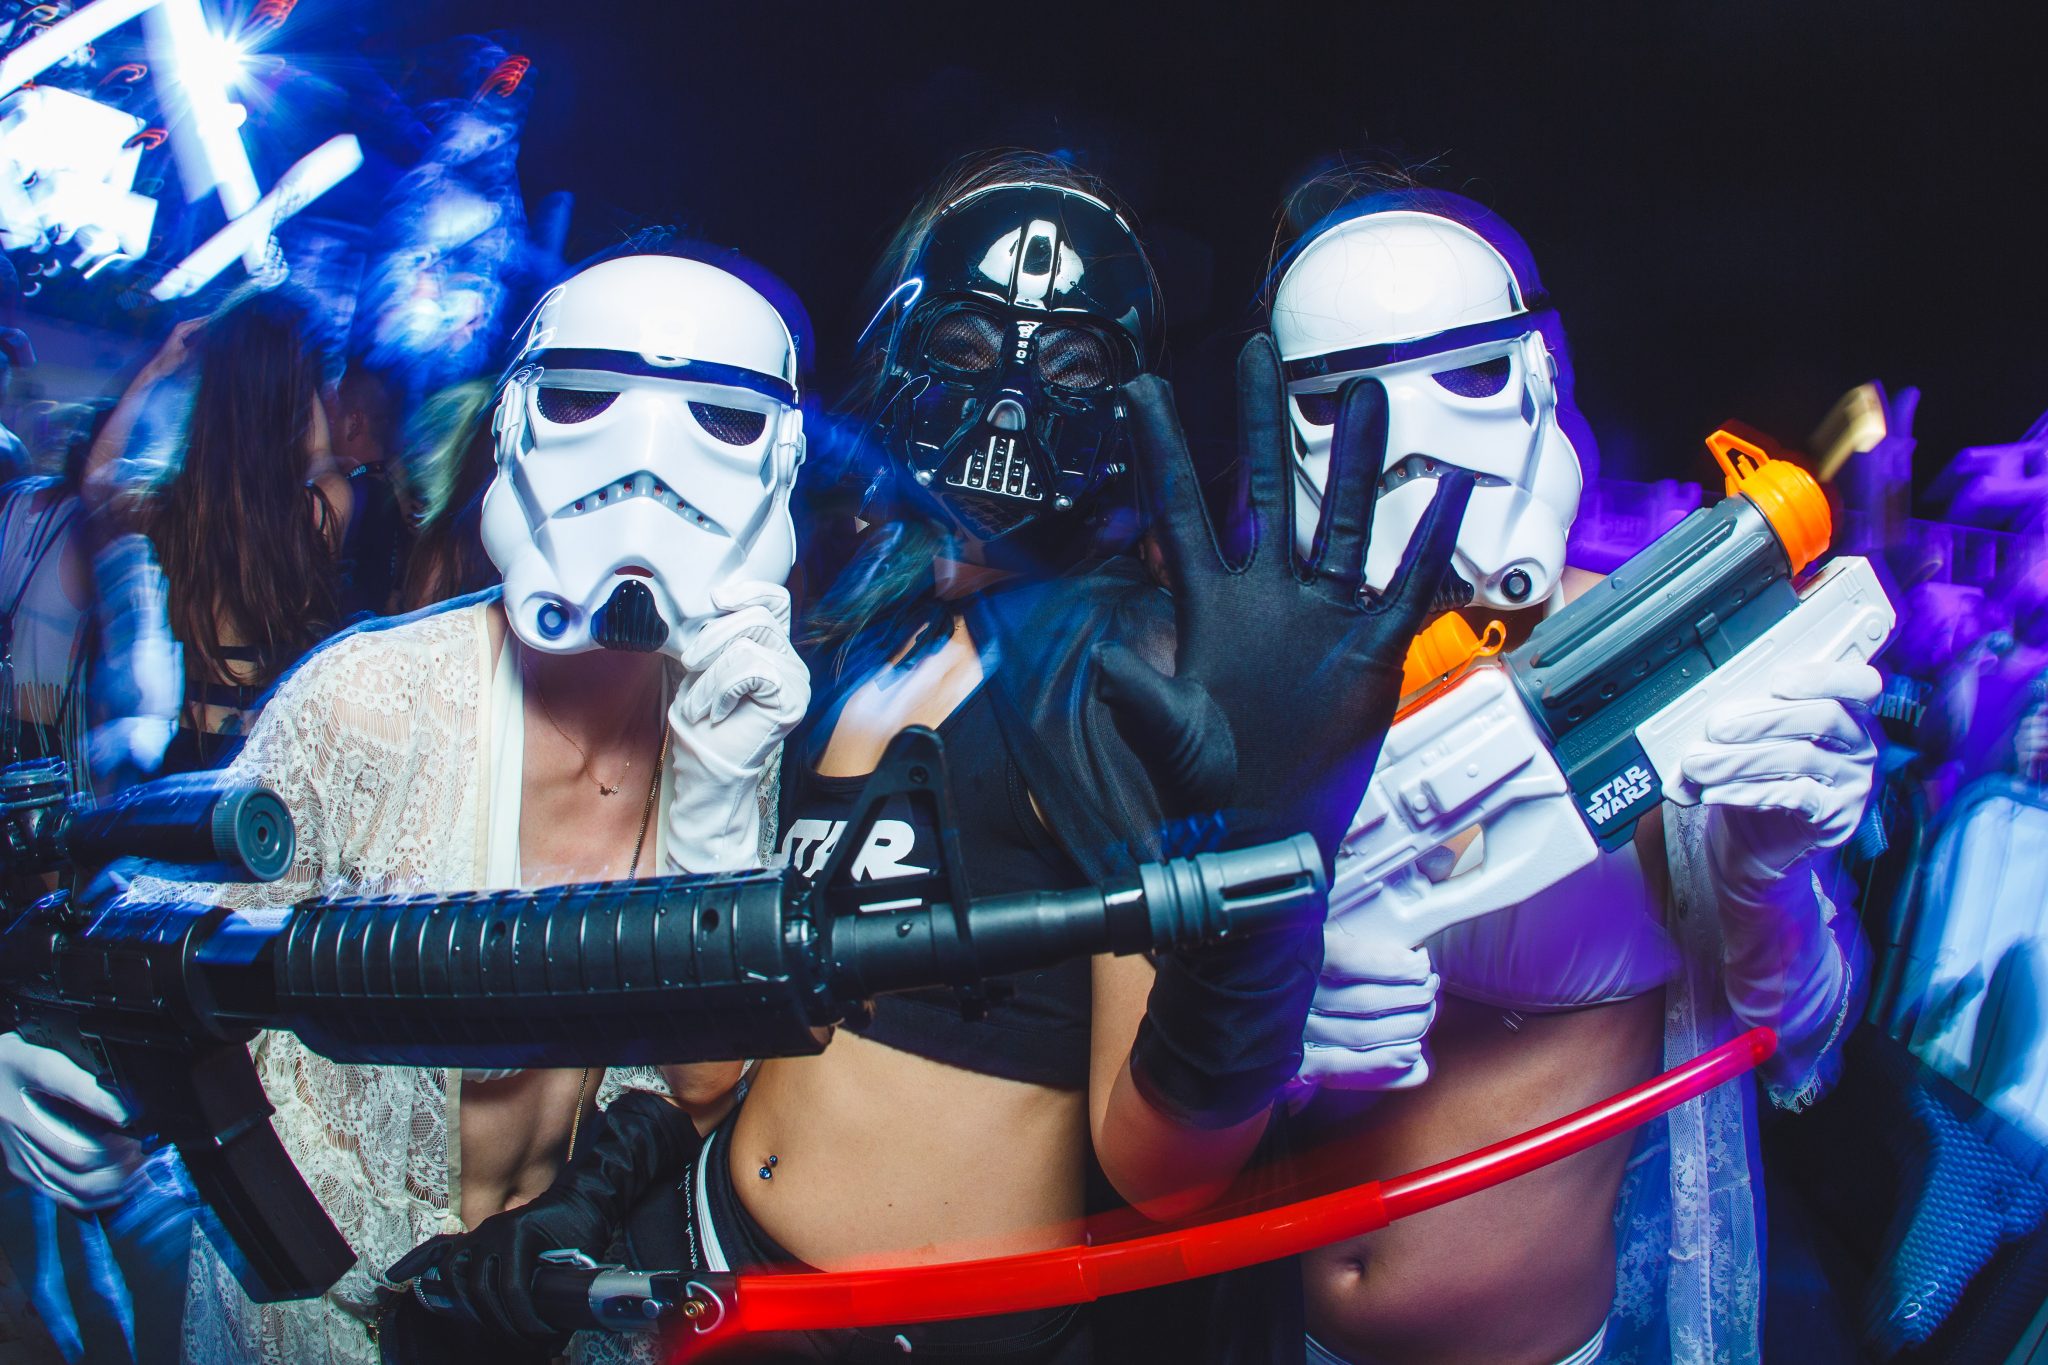 ITS2018: Star Wars themed party